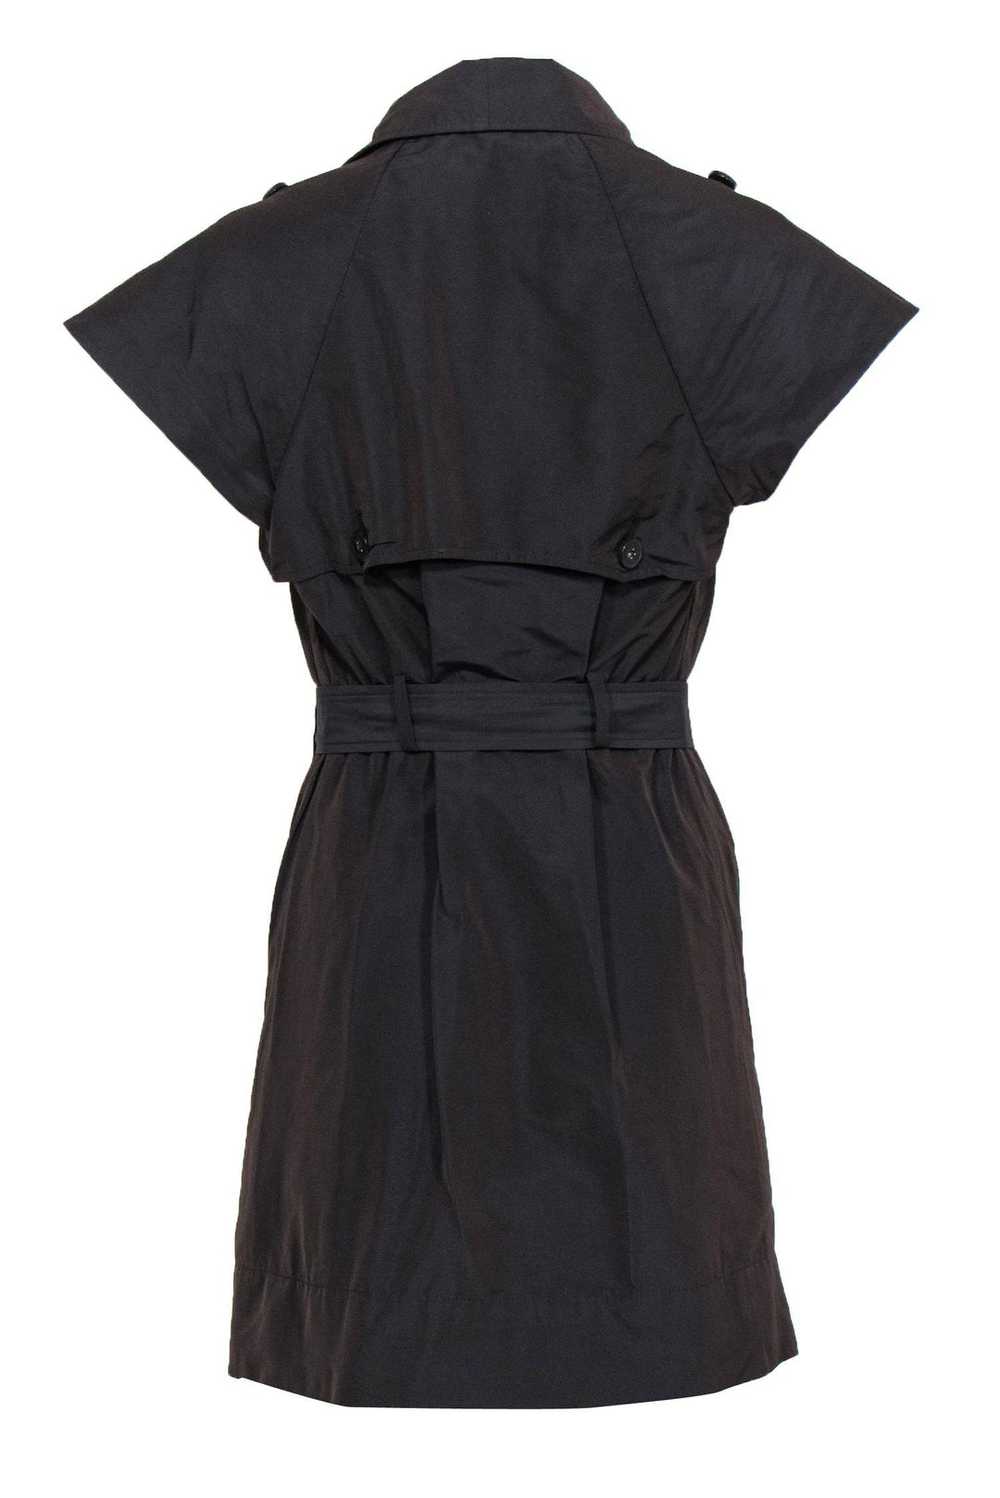 All Saints - Two-Tone Brown Double Breasted Dress… - image 3